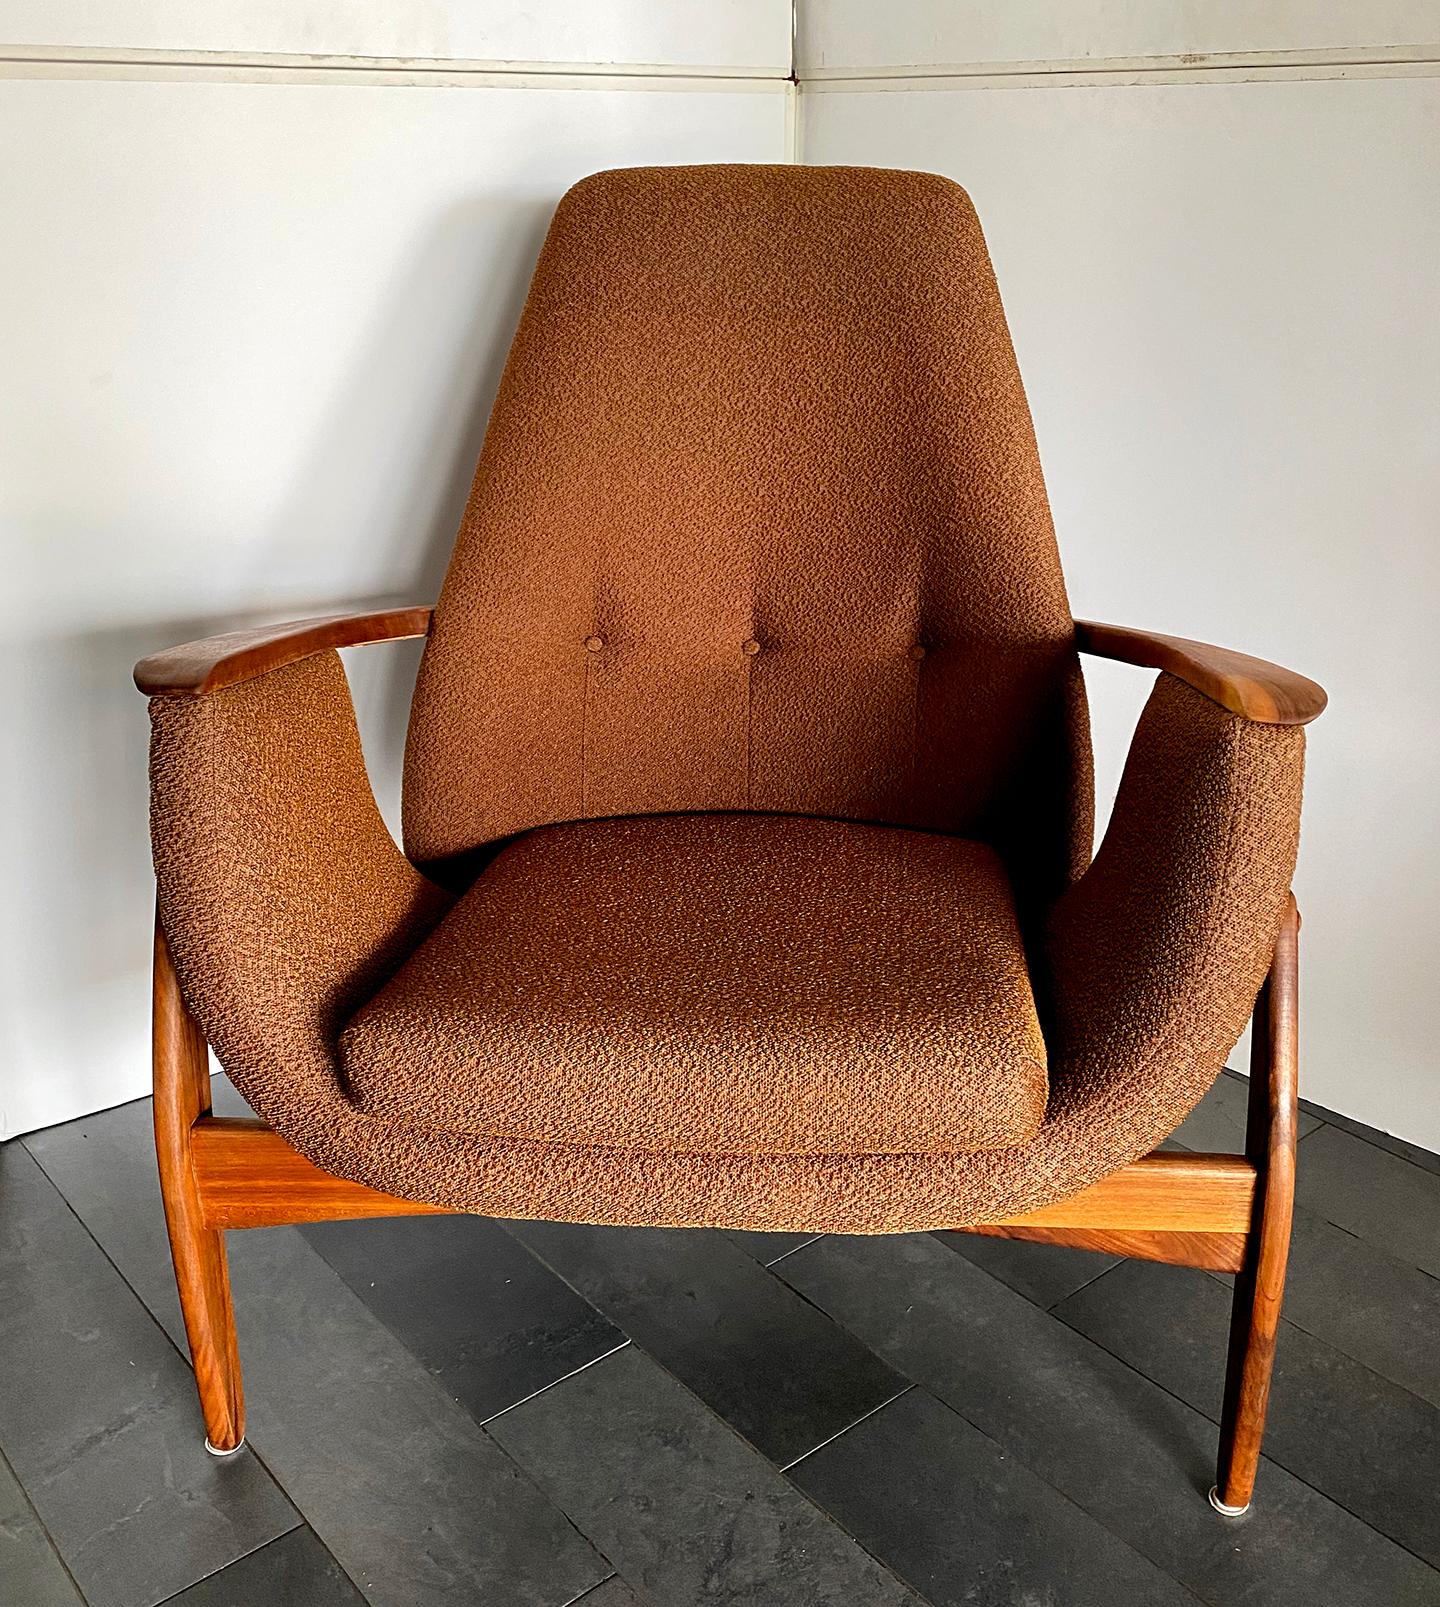 An unusual and rare 3-legged Italian designed, Canadian manufactured chair with original fabric. The chair has an ample seating area and wide arms for added comfort. The original nubby fabric is soft and supple and accented by a three button, tufted